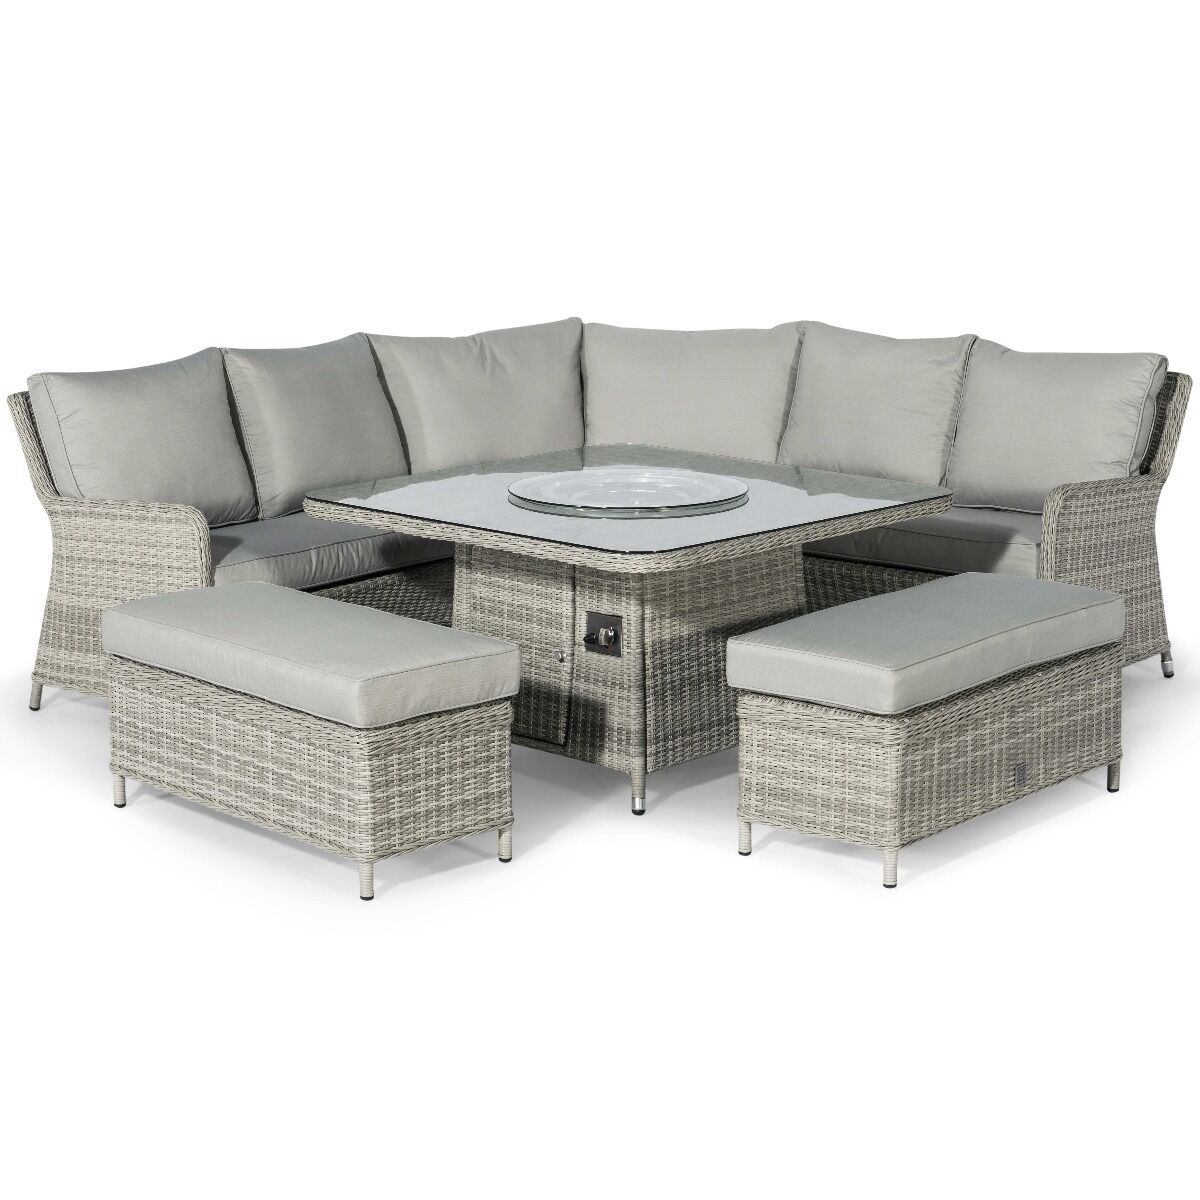 Maze - Oxford Royal Rattan Corner Dining Sofa Set with Fire Pit Table product image